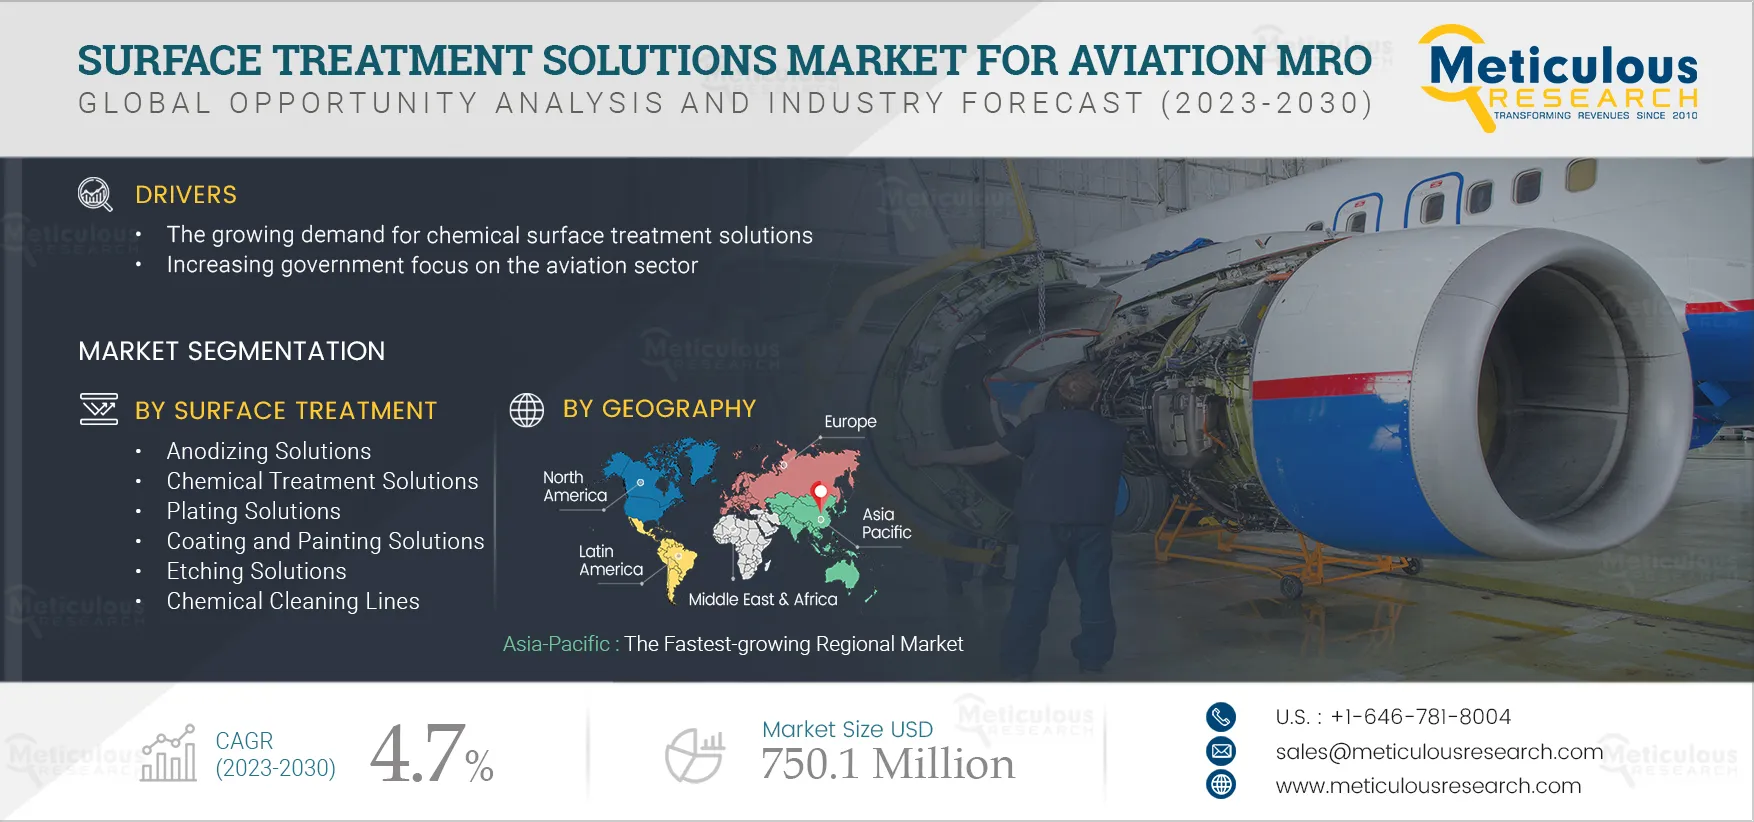 Surface Treatment Solutions Market for Aviation MRO